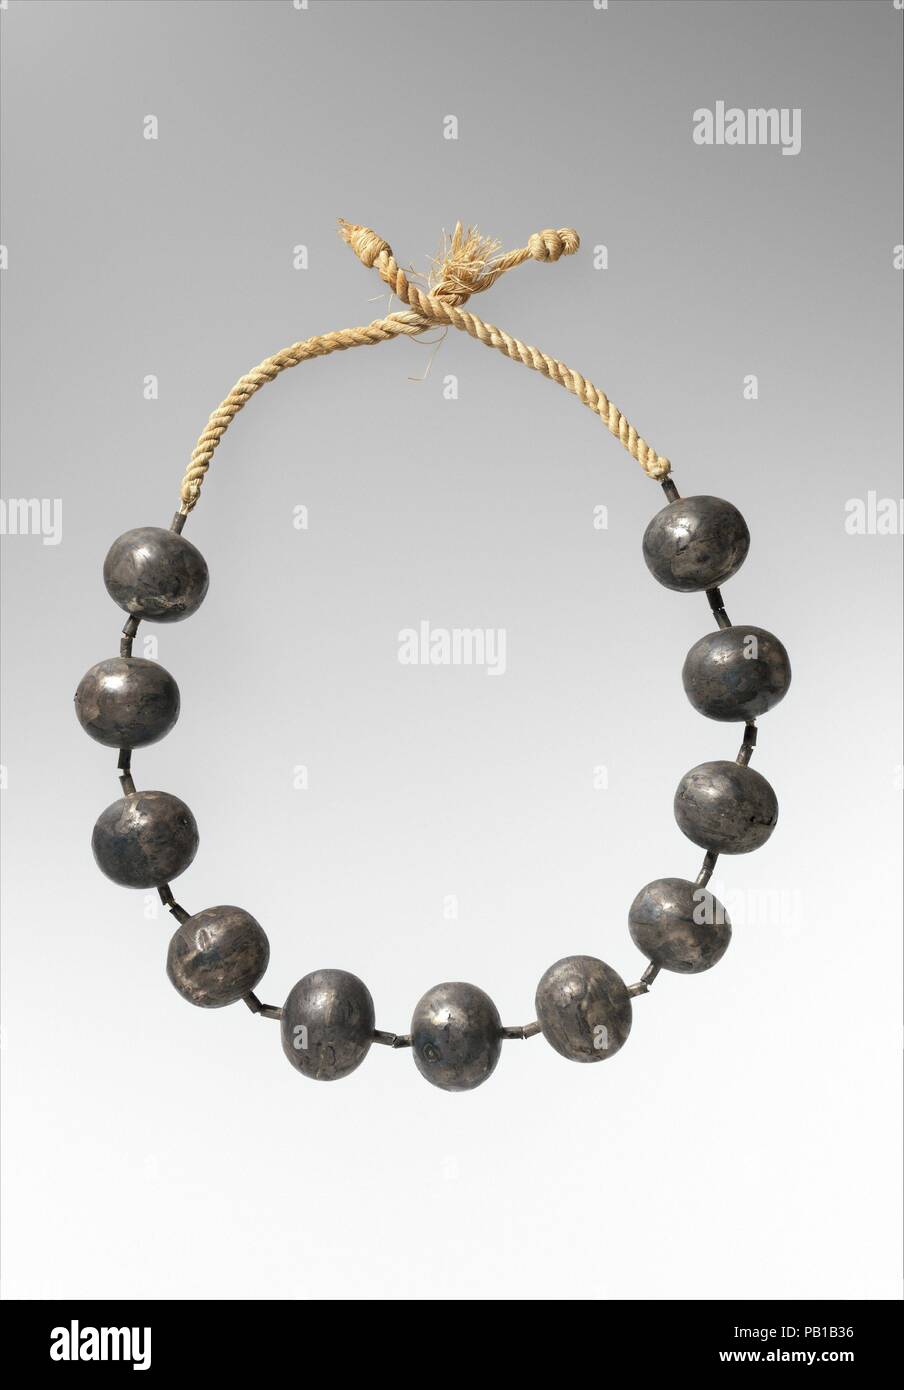 Necklace of Wah. Dimensions: L. of necklace  70.5 cm (27 3/4 in.); Greatest diam. 3.2 cm (1 1/4 in.); Smallest diam. 2.5 cm (1 in.). Dynasty: Dynasty 12. Reign: reign of Amenemhat I, early. Date: ca. 1981-1975 B.C..  After Wah's mummy had been partially wrapped, this necklace of silver beads was tied around the neck.  The beads were strung on twelve or more strands of thread that were then twisted through ties of thick linen cord.  Three other necklaces had been placed on the mummy in the same position.  One of these is made of gold beads (40.3.17); one is made of blue faience beads (40.3.18); Stock Photo